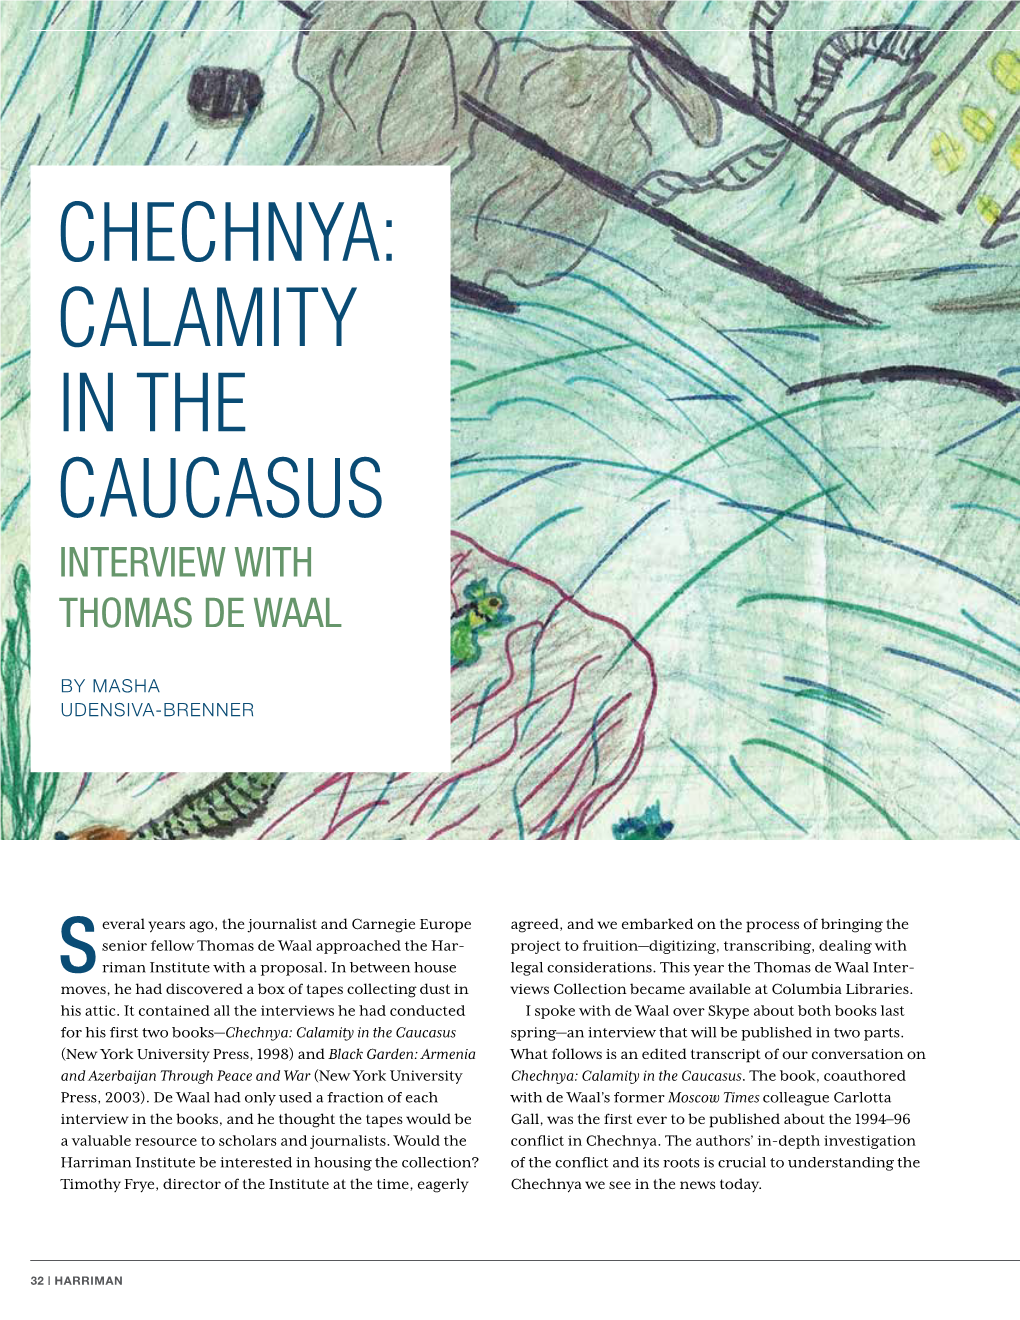 Chechnya: Calamity in the Caucasus Interview with Thomas De Waal